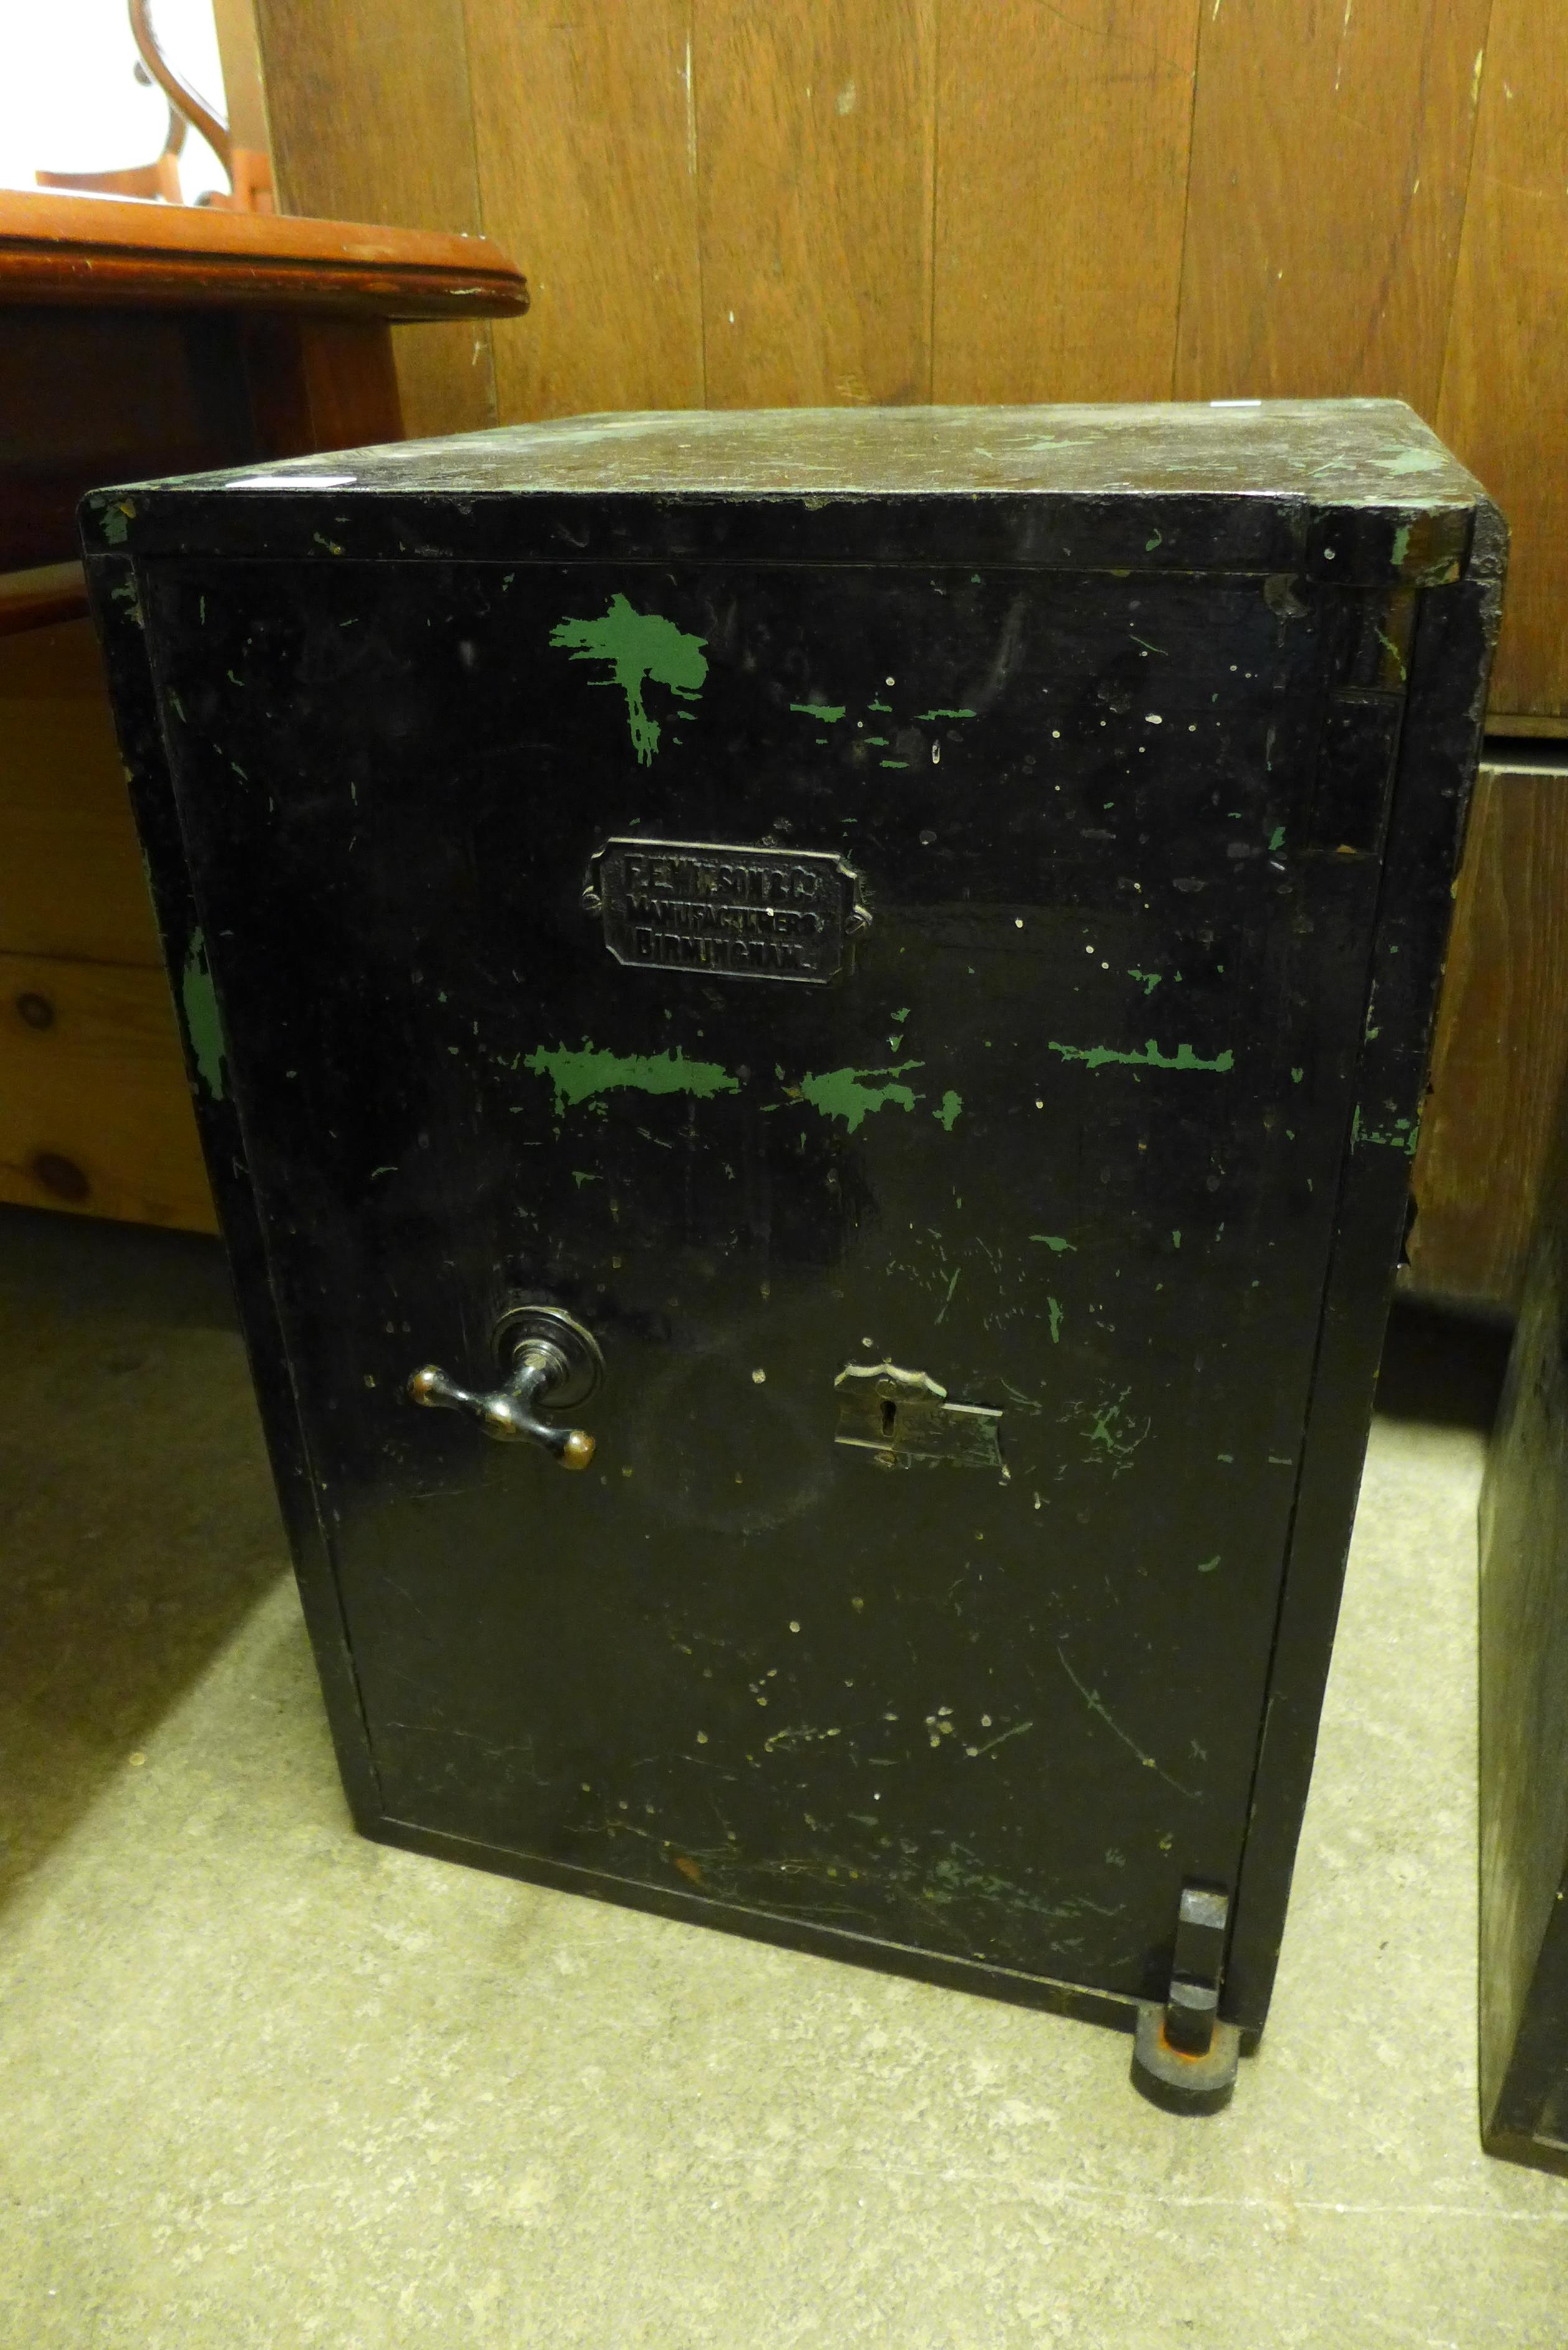 A F.E. Wilson cat iron safe - with key